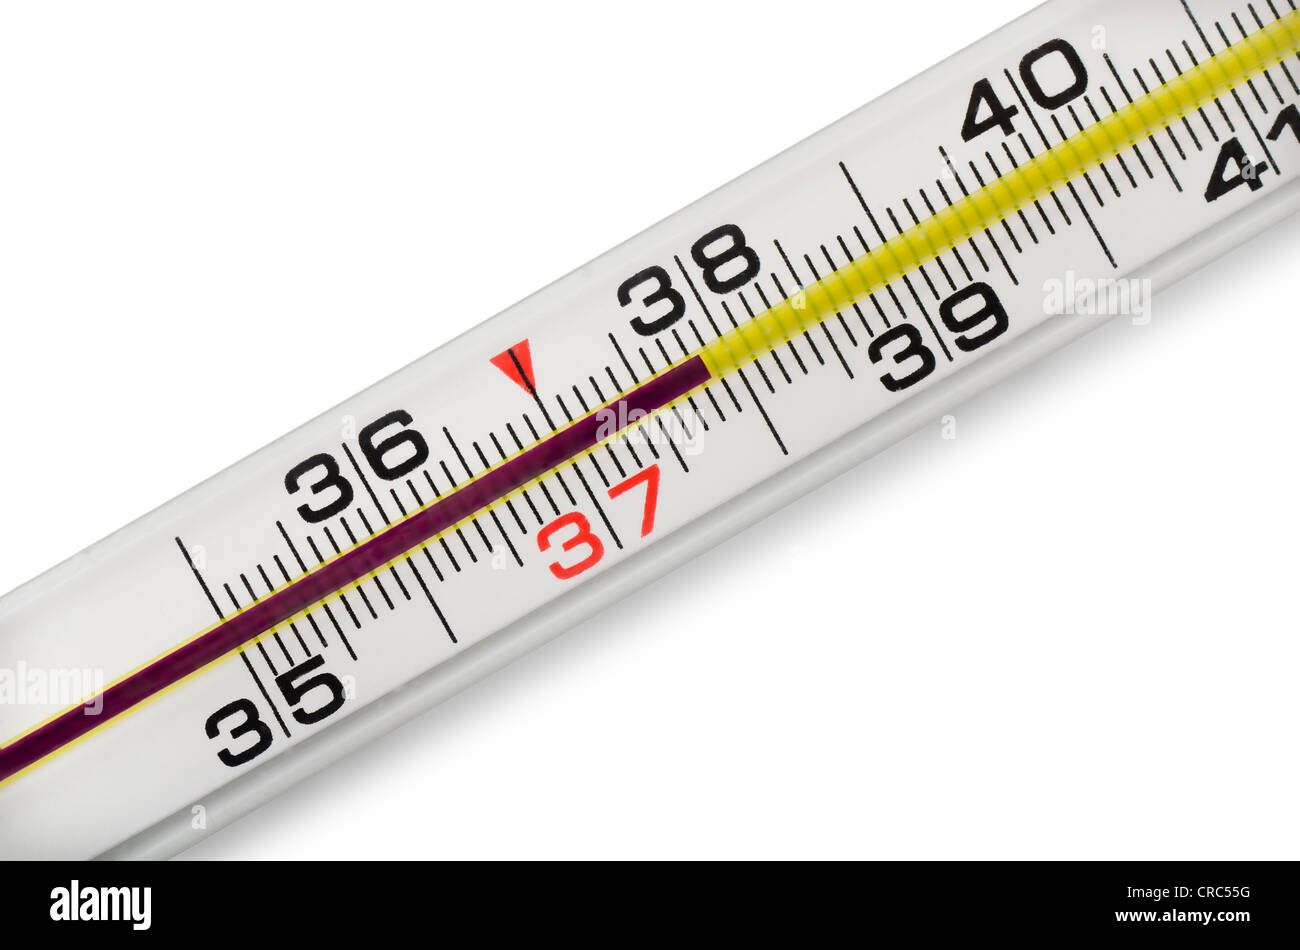 High fever on mercury thermometer Stock Photo